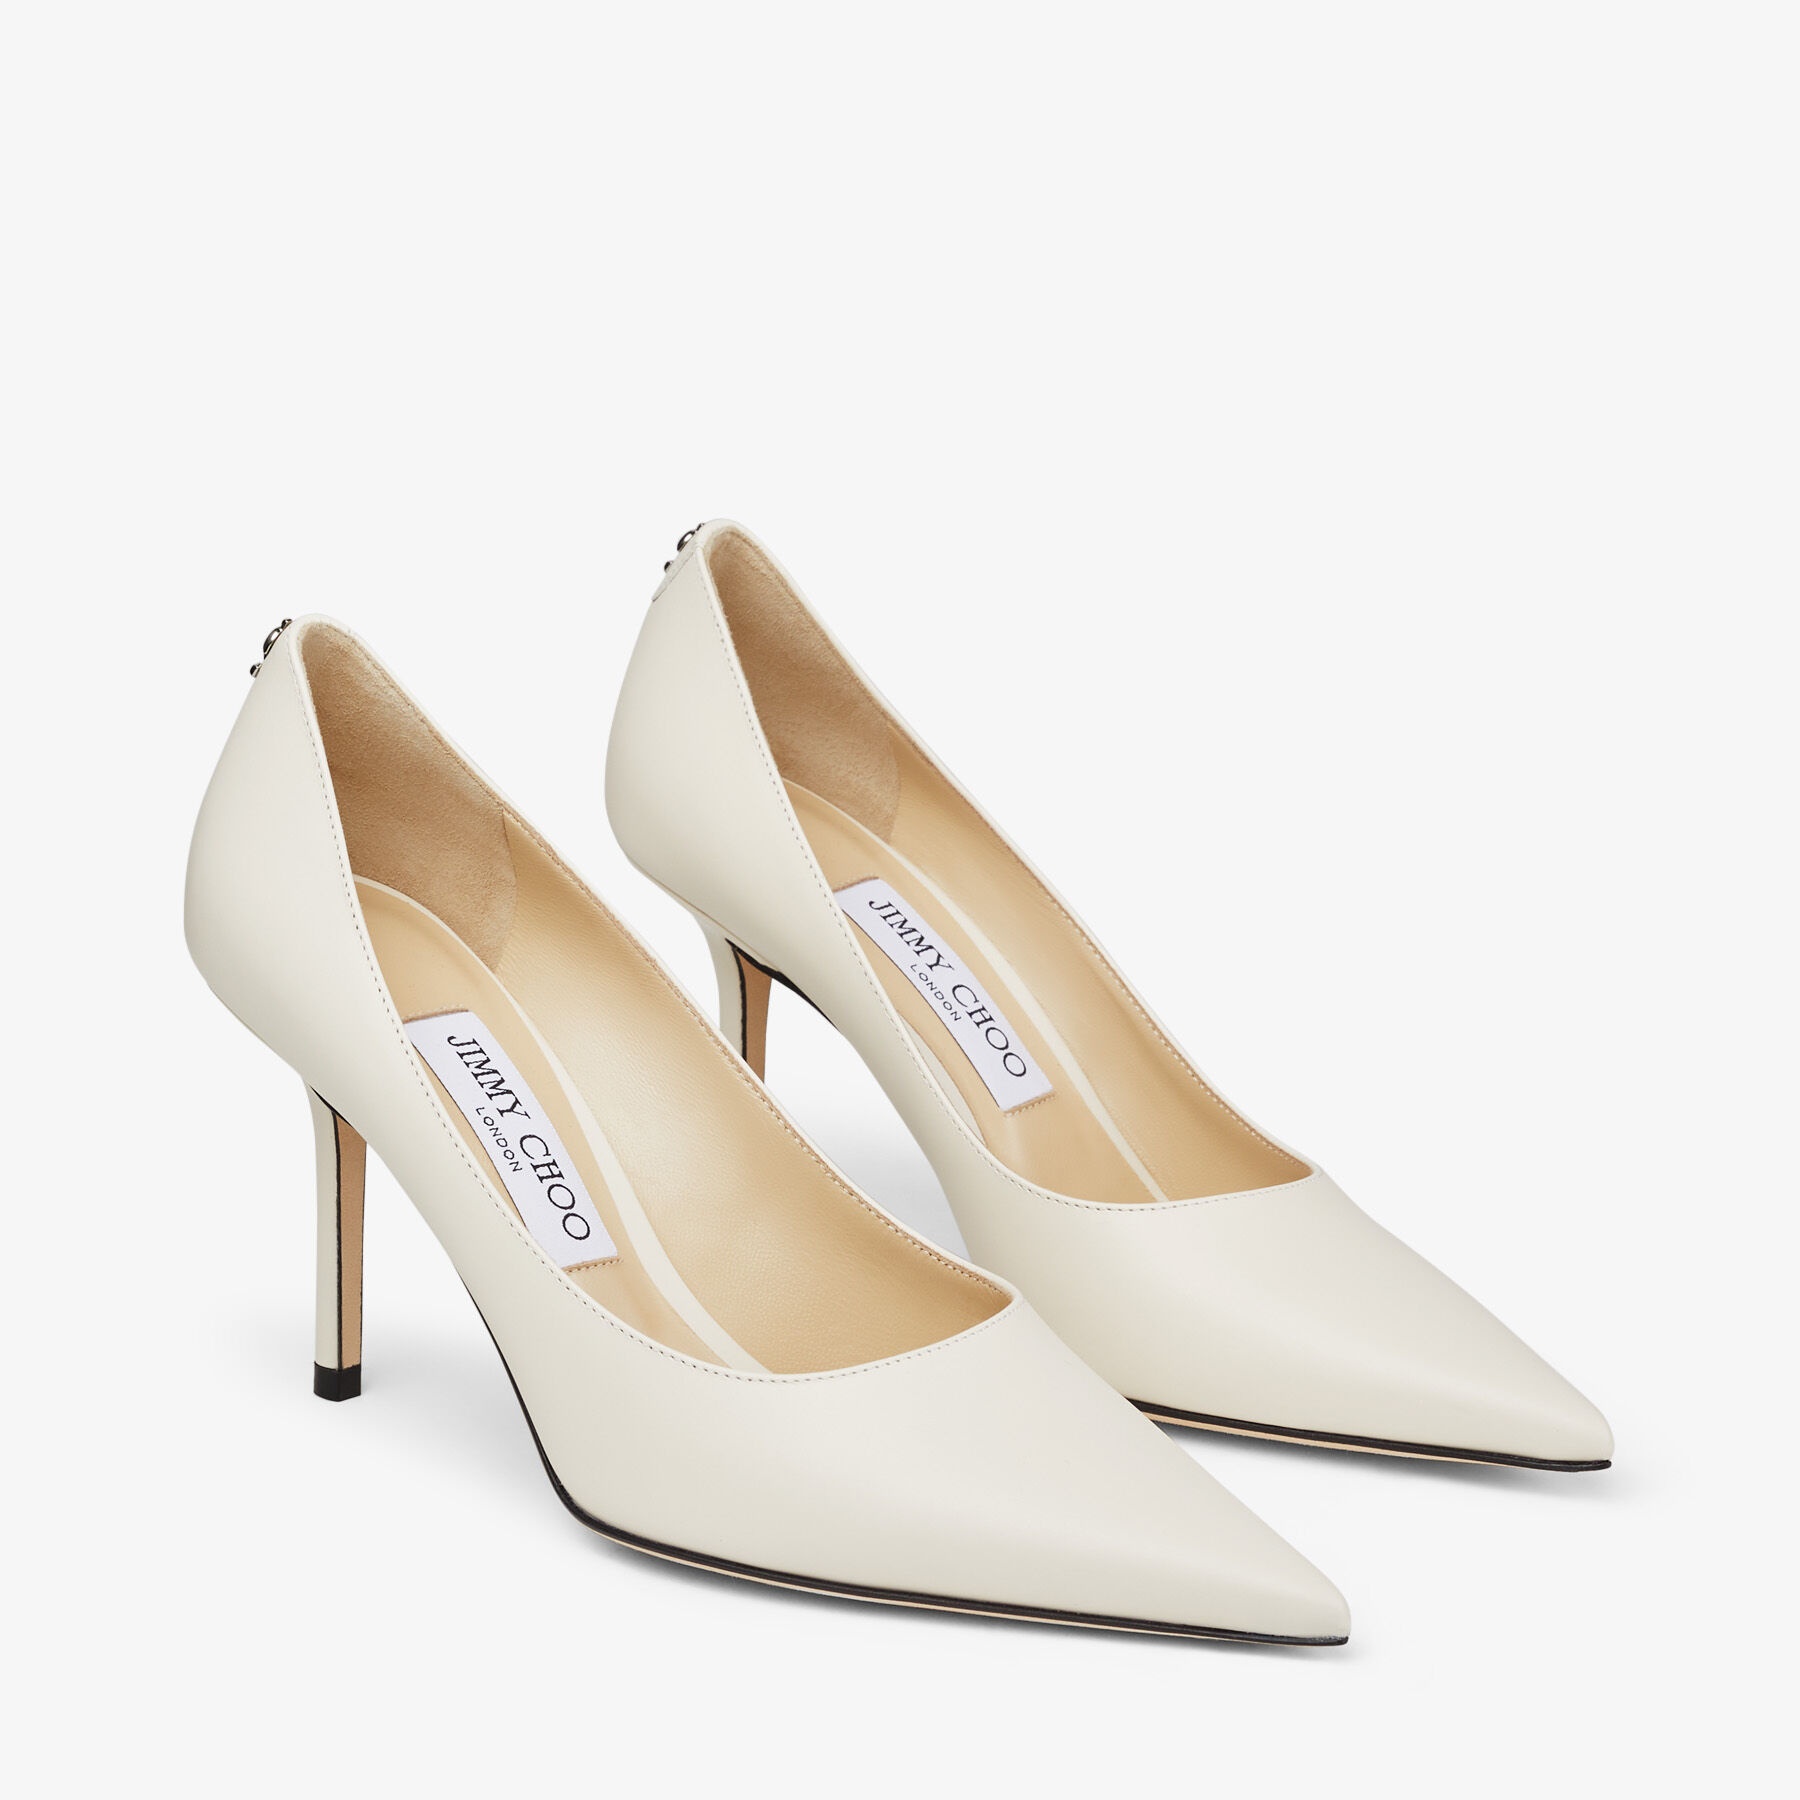 Love 85
Latte Calf Leather Pointed-Toe Pumps with JC Emblem - 2